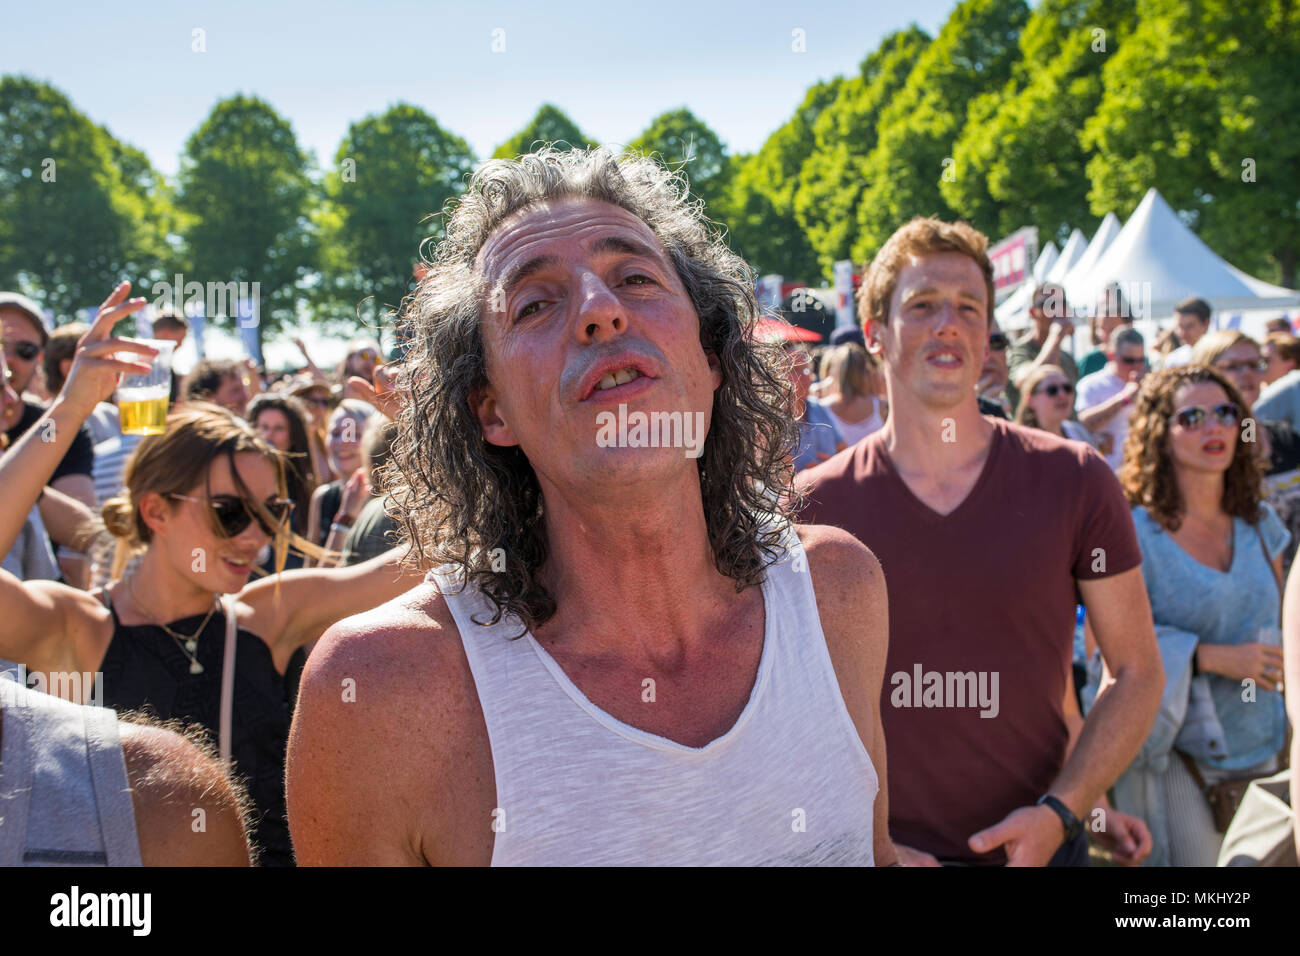 Middle aged man with long hair intensely enjoying music at liberation feast in the Netherlands Stock Photo